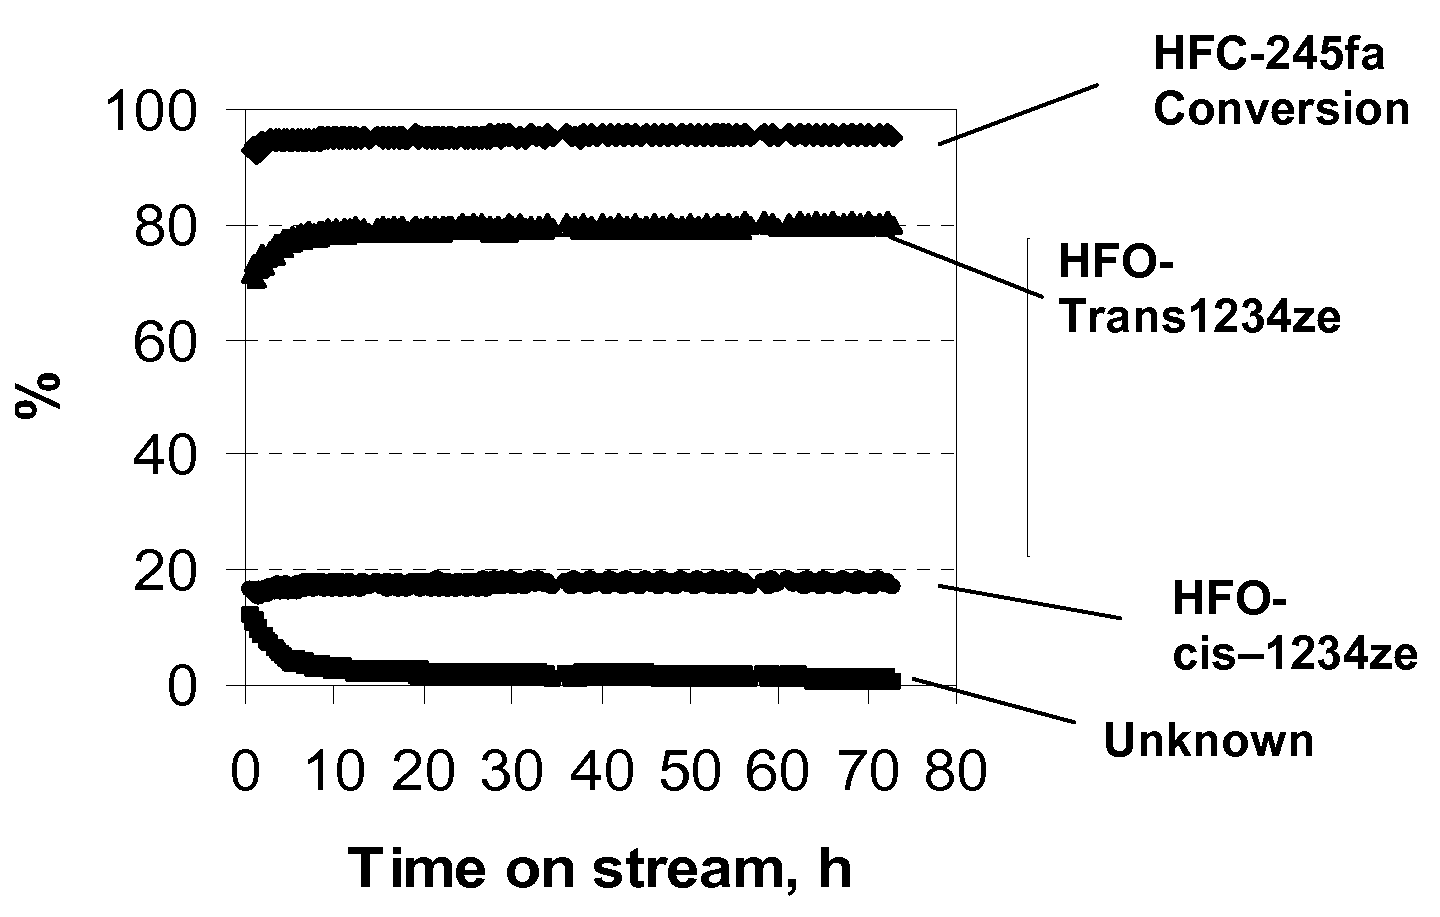 PROCESS FOR THE PRODUCTION OF HFO TRANS-1234ze FROM HFC-245fa